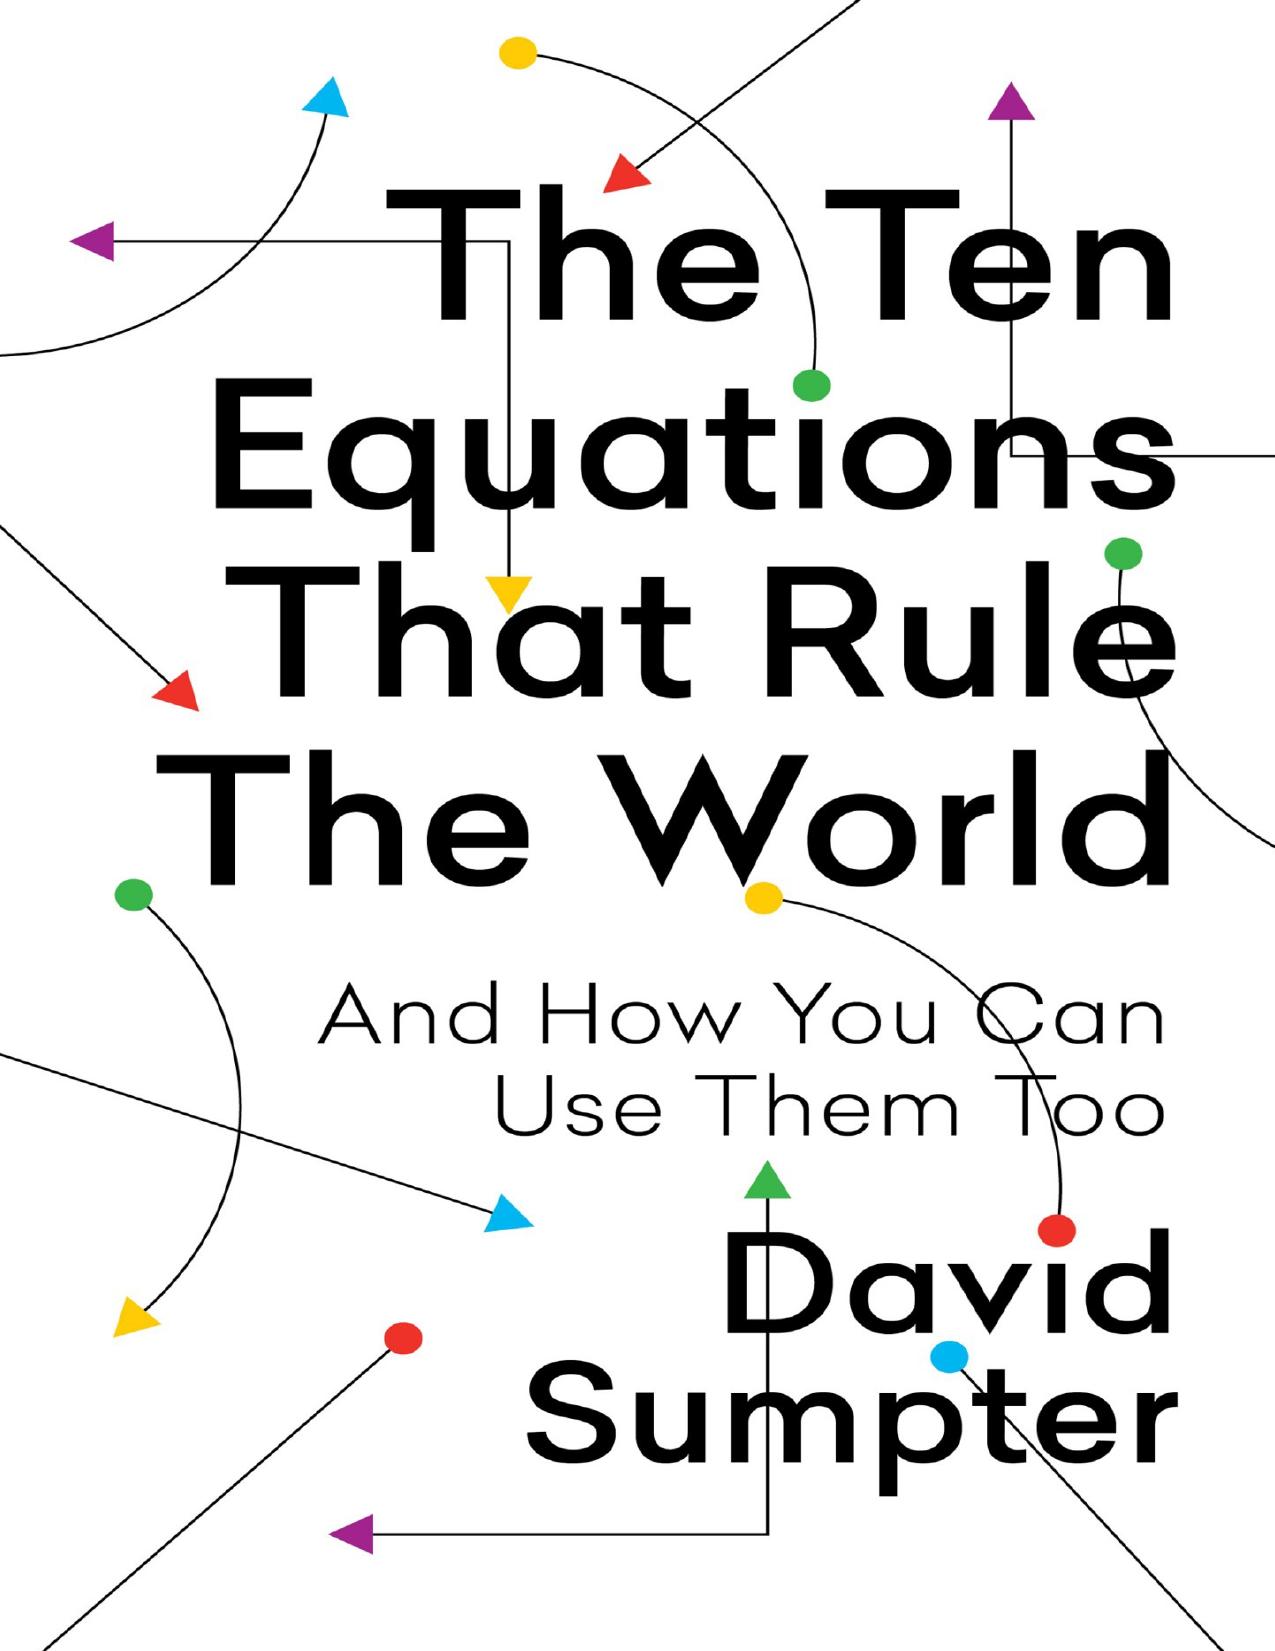 The Ten Equations That Rule the World by David Sumpter